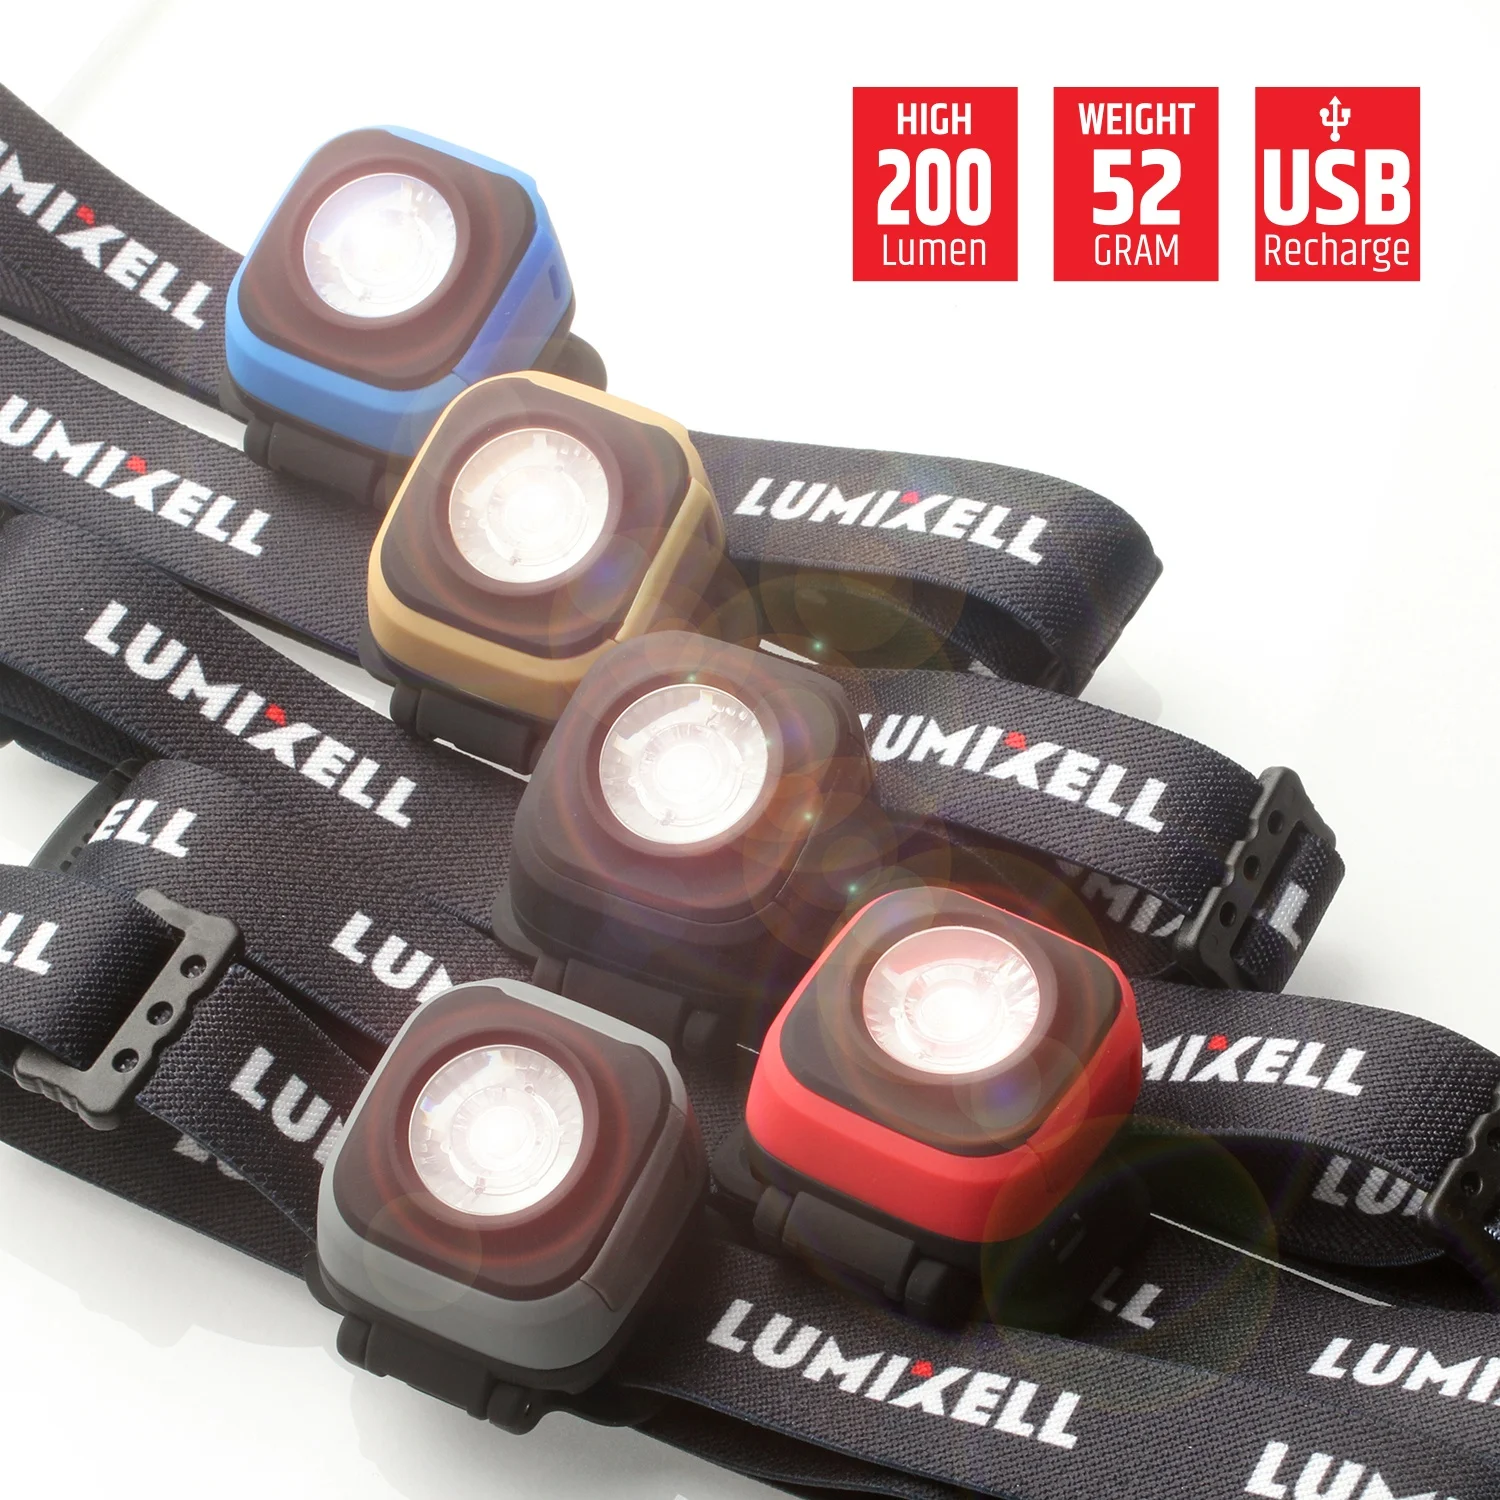 New Arrival small size super bright led outdoor headlamp rechargeable 200 lumen for camping